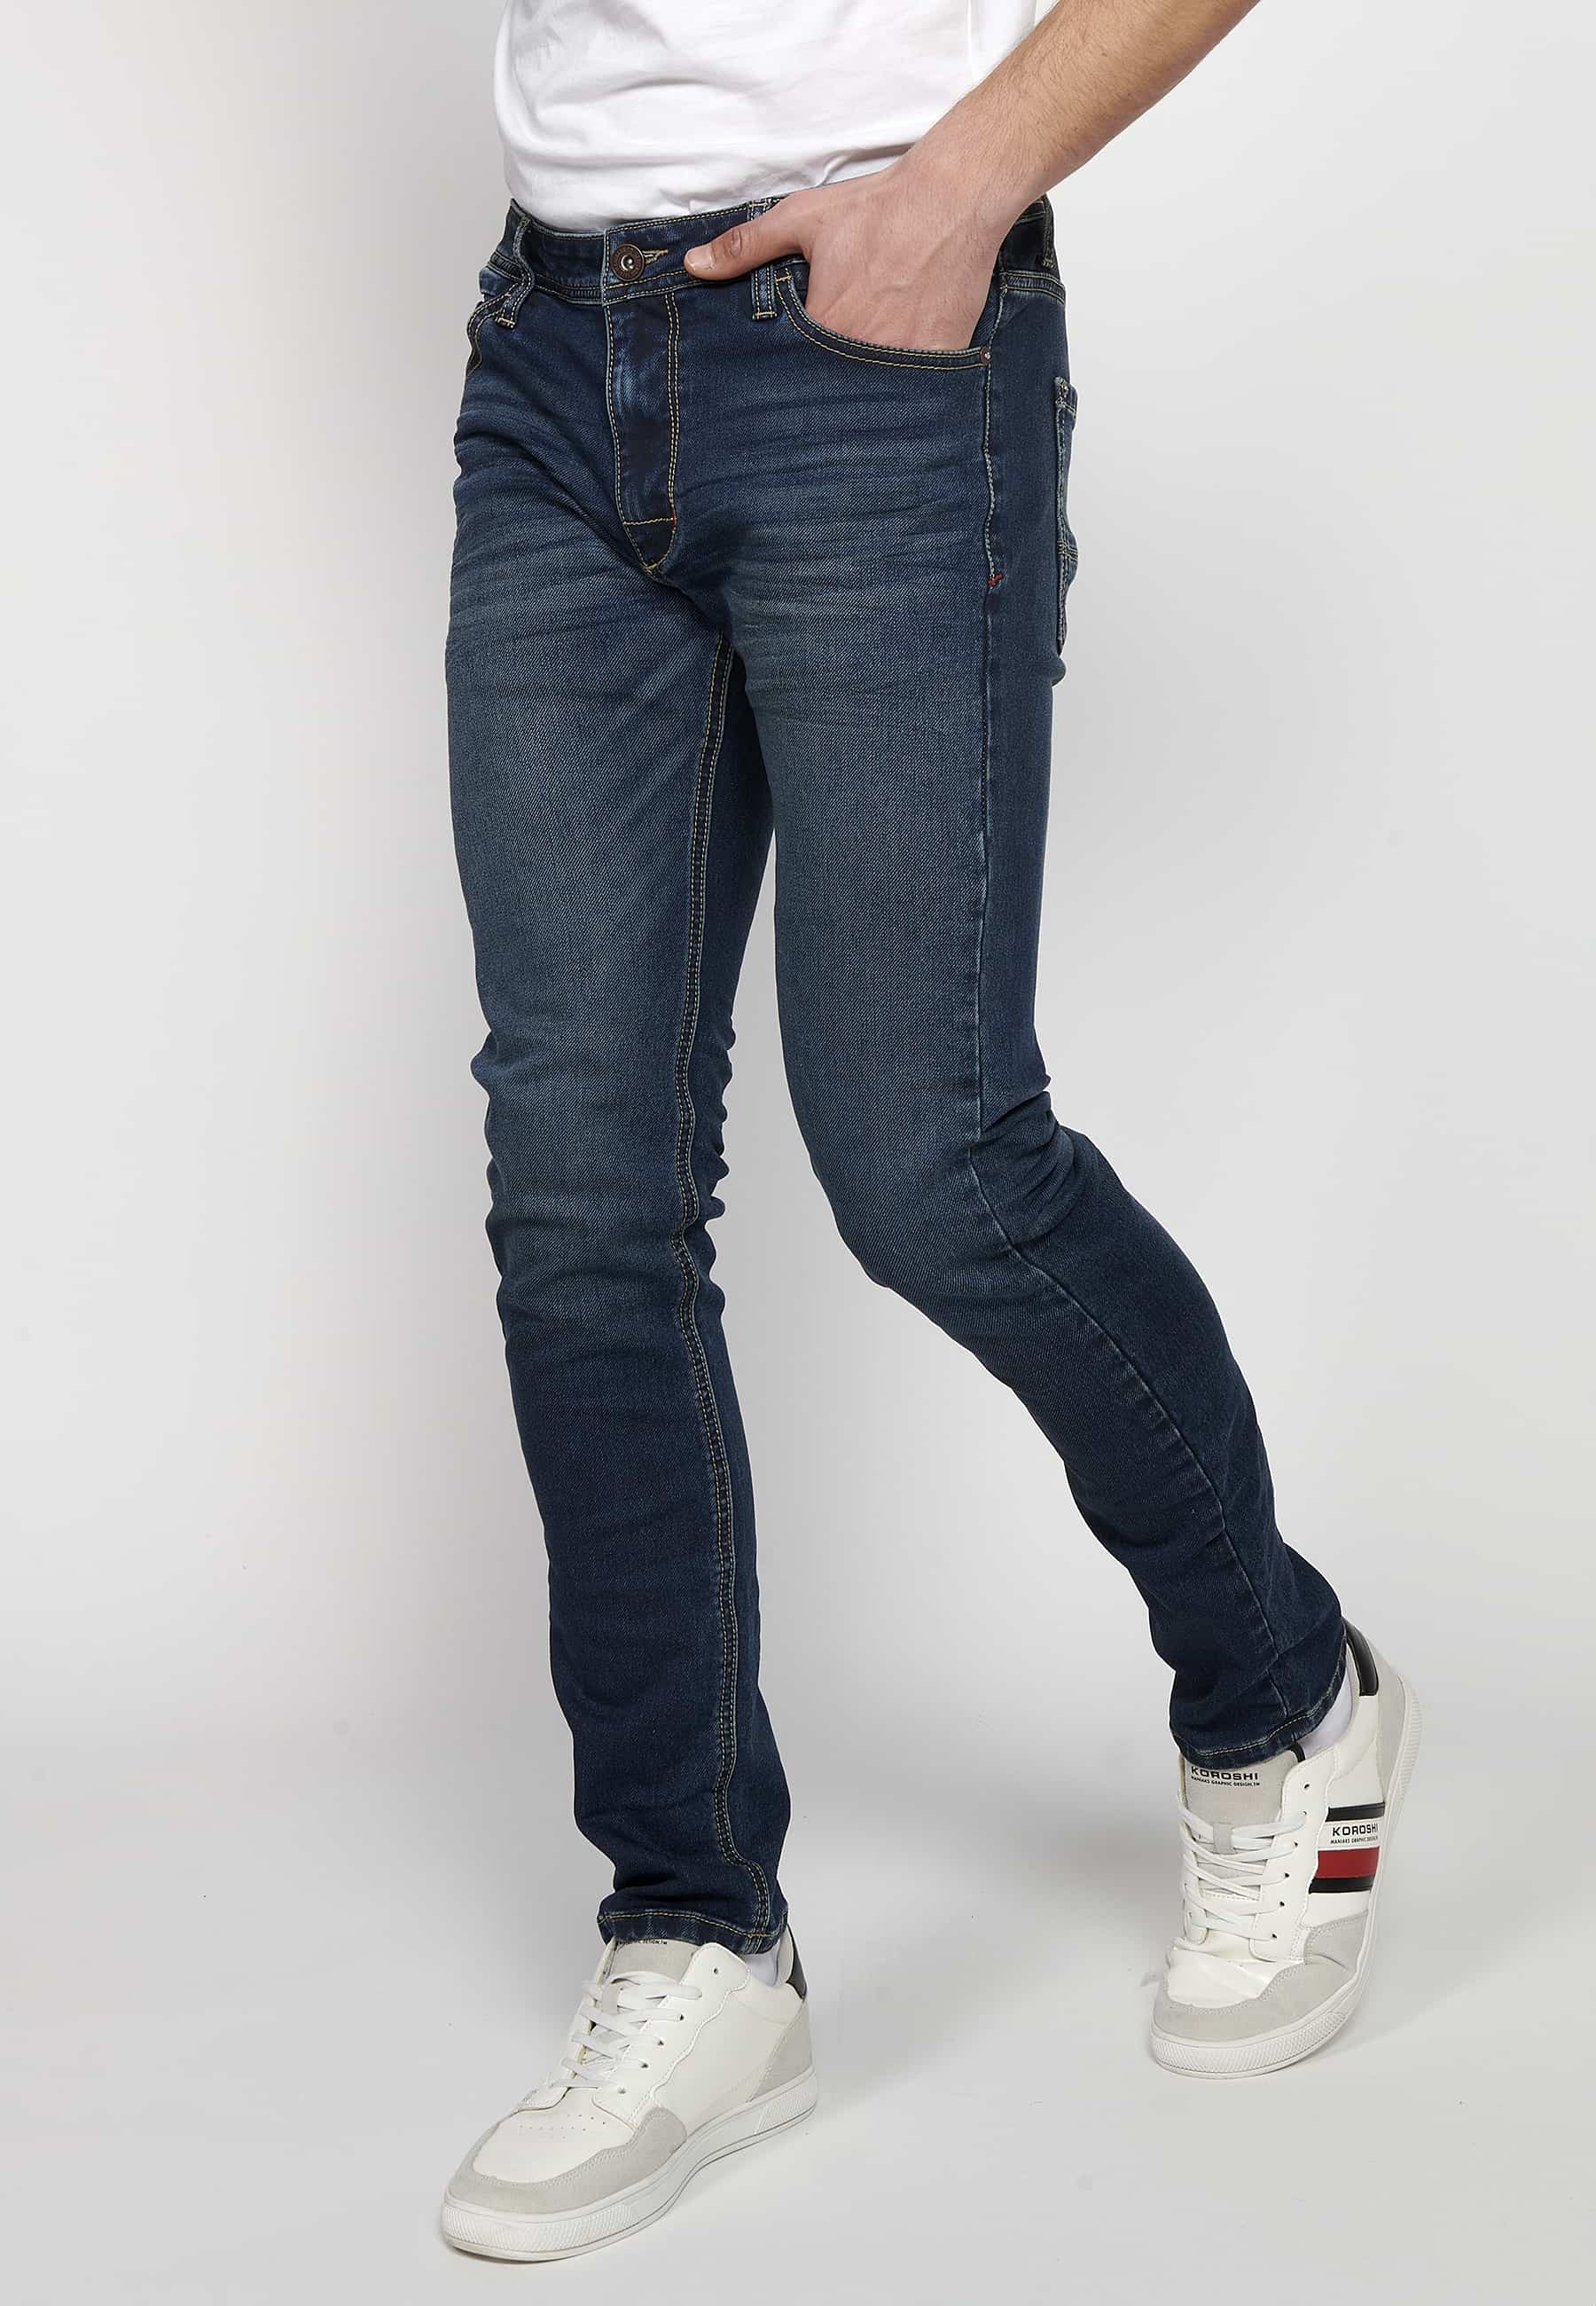 Slim fit long jeans with front zipper and button closure with five pockets, one blue pocket pocket for Men 1